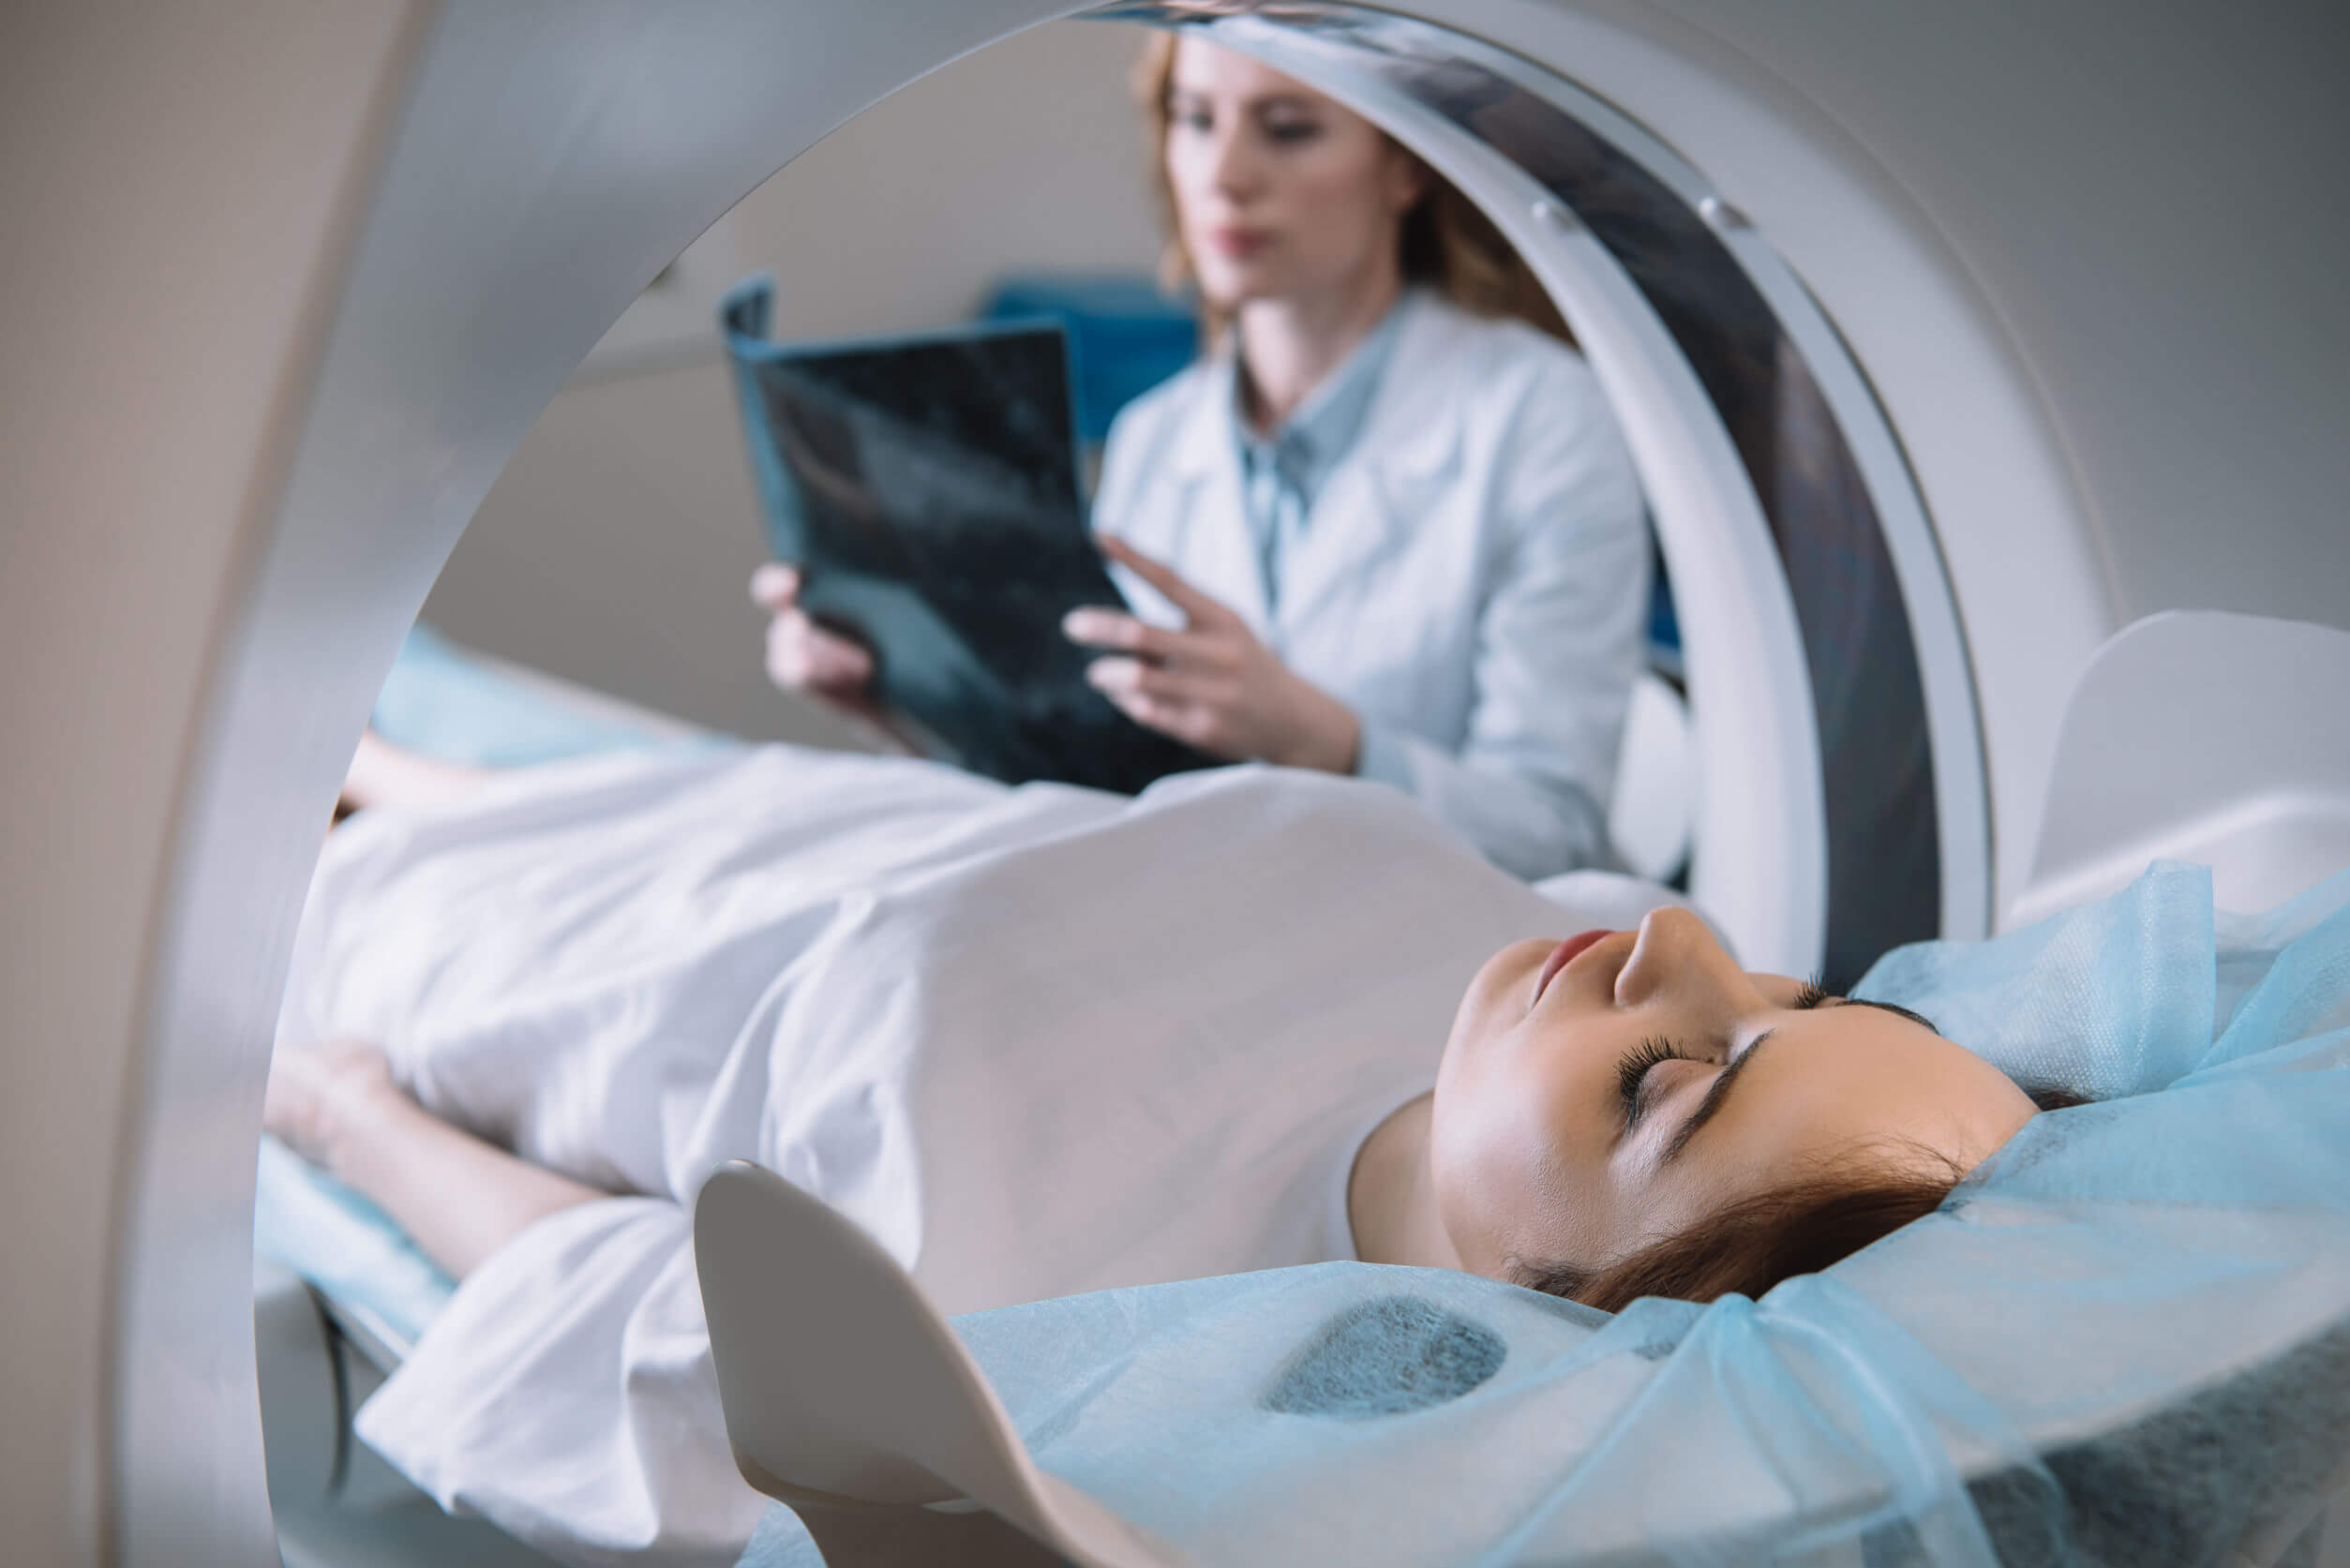 Magnetic resonance imaging is a method used for the diagnosis of secondary arterial hypertension